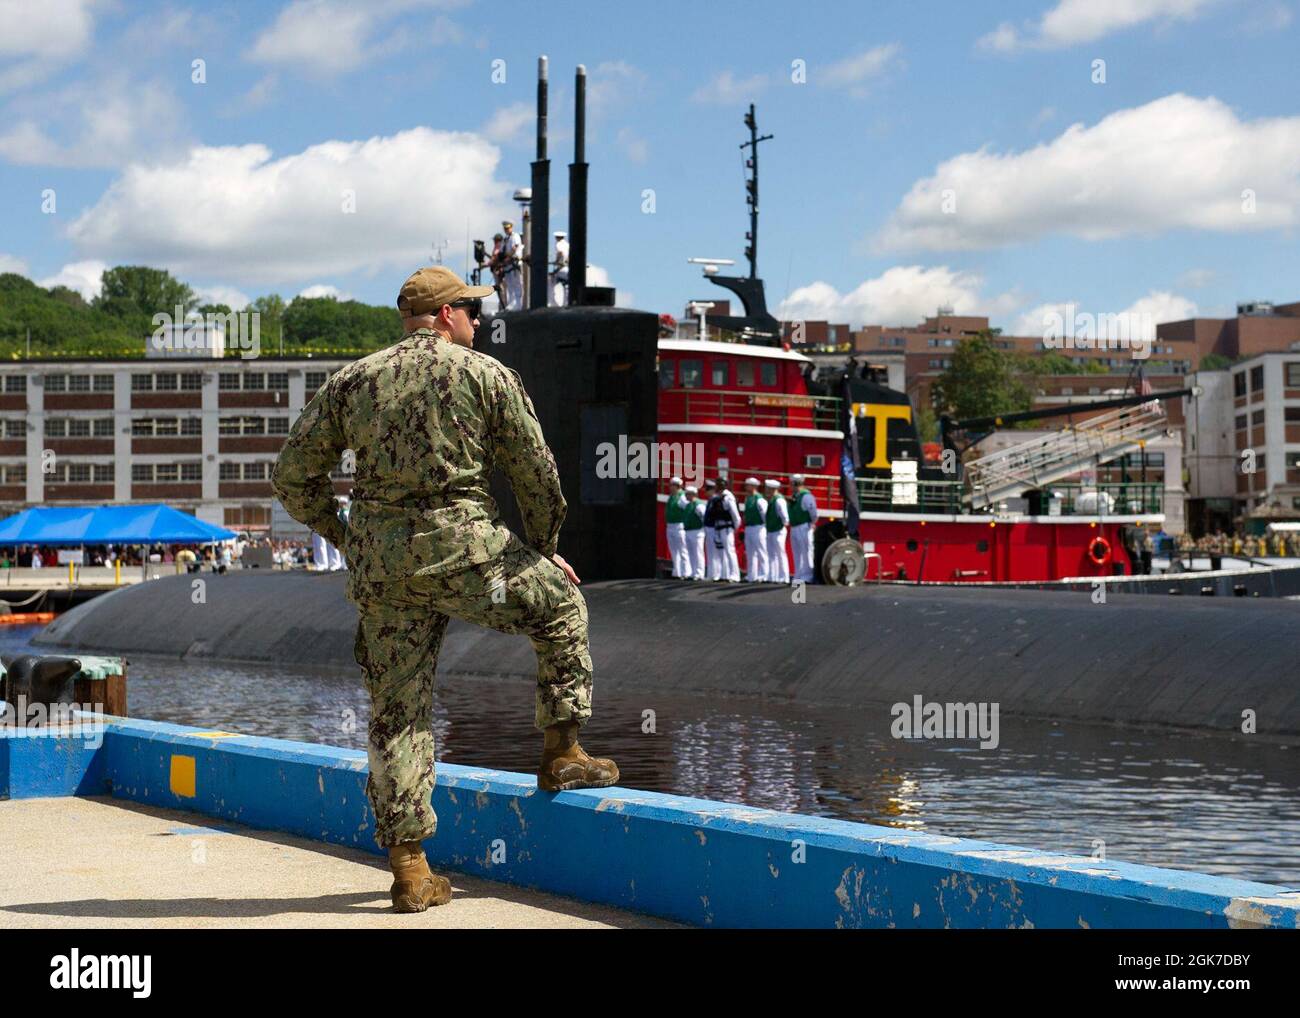 210824-N-ME396-1158 GROTON, Conn. (August 26, 2021) Electronics Technician (Navigation) 2nd Class Jesse Ciervo watches as USS San Juan (SSN 751) returns to homeport following a seven-month deployment. San Juan steamed nearly 80,000 miles during its deployment. San Juan was commissioned Aug. 6, 1988 and is the second U.S. warship named after the capital city of Puerto Rico. It is 362 feet long with a beam of 33 feet and a crew of approximately 139. Stock Photo